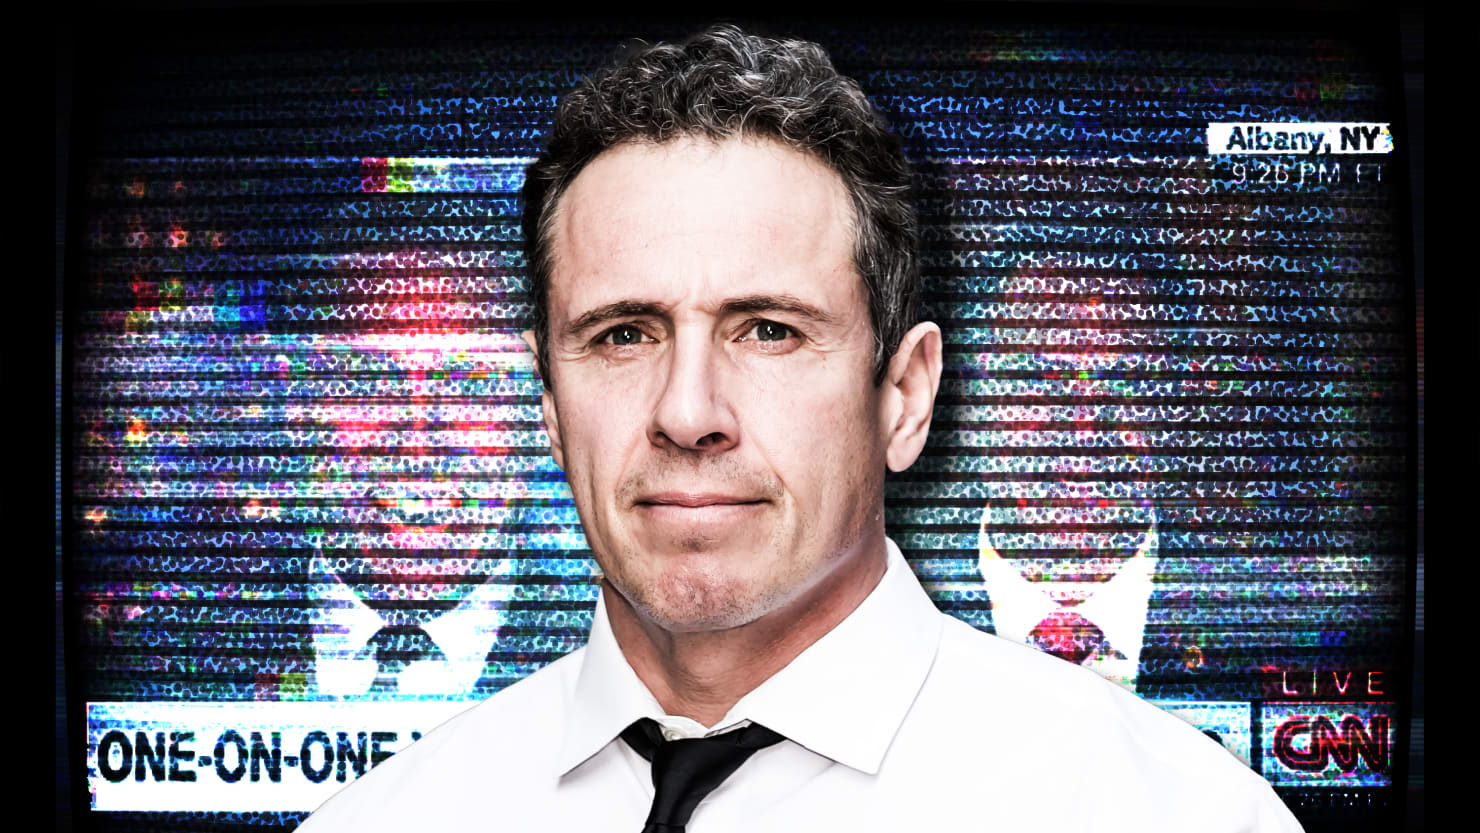 CNN Indefinitely Suspends Chris Cuomo After Docs Reveal He Dug for Dirt on Andrew’s Accusers – The Daily Beast